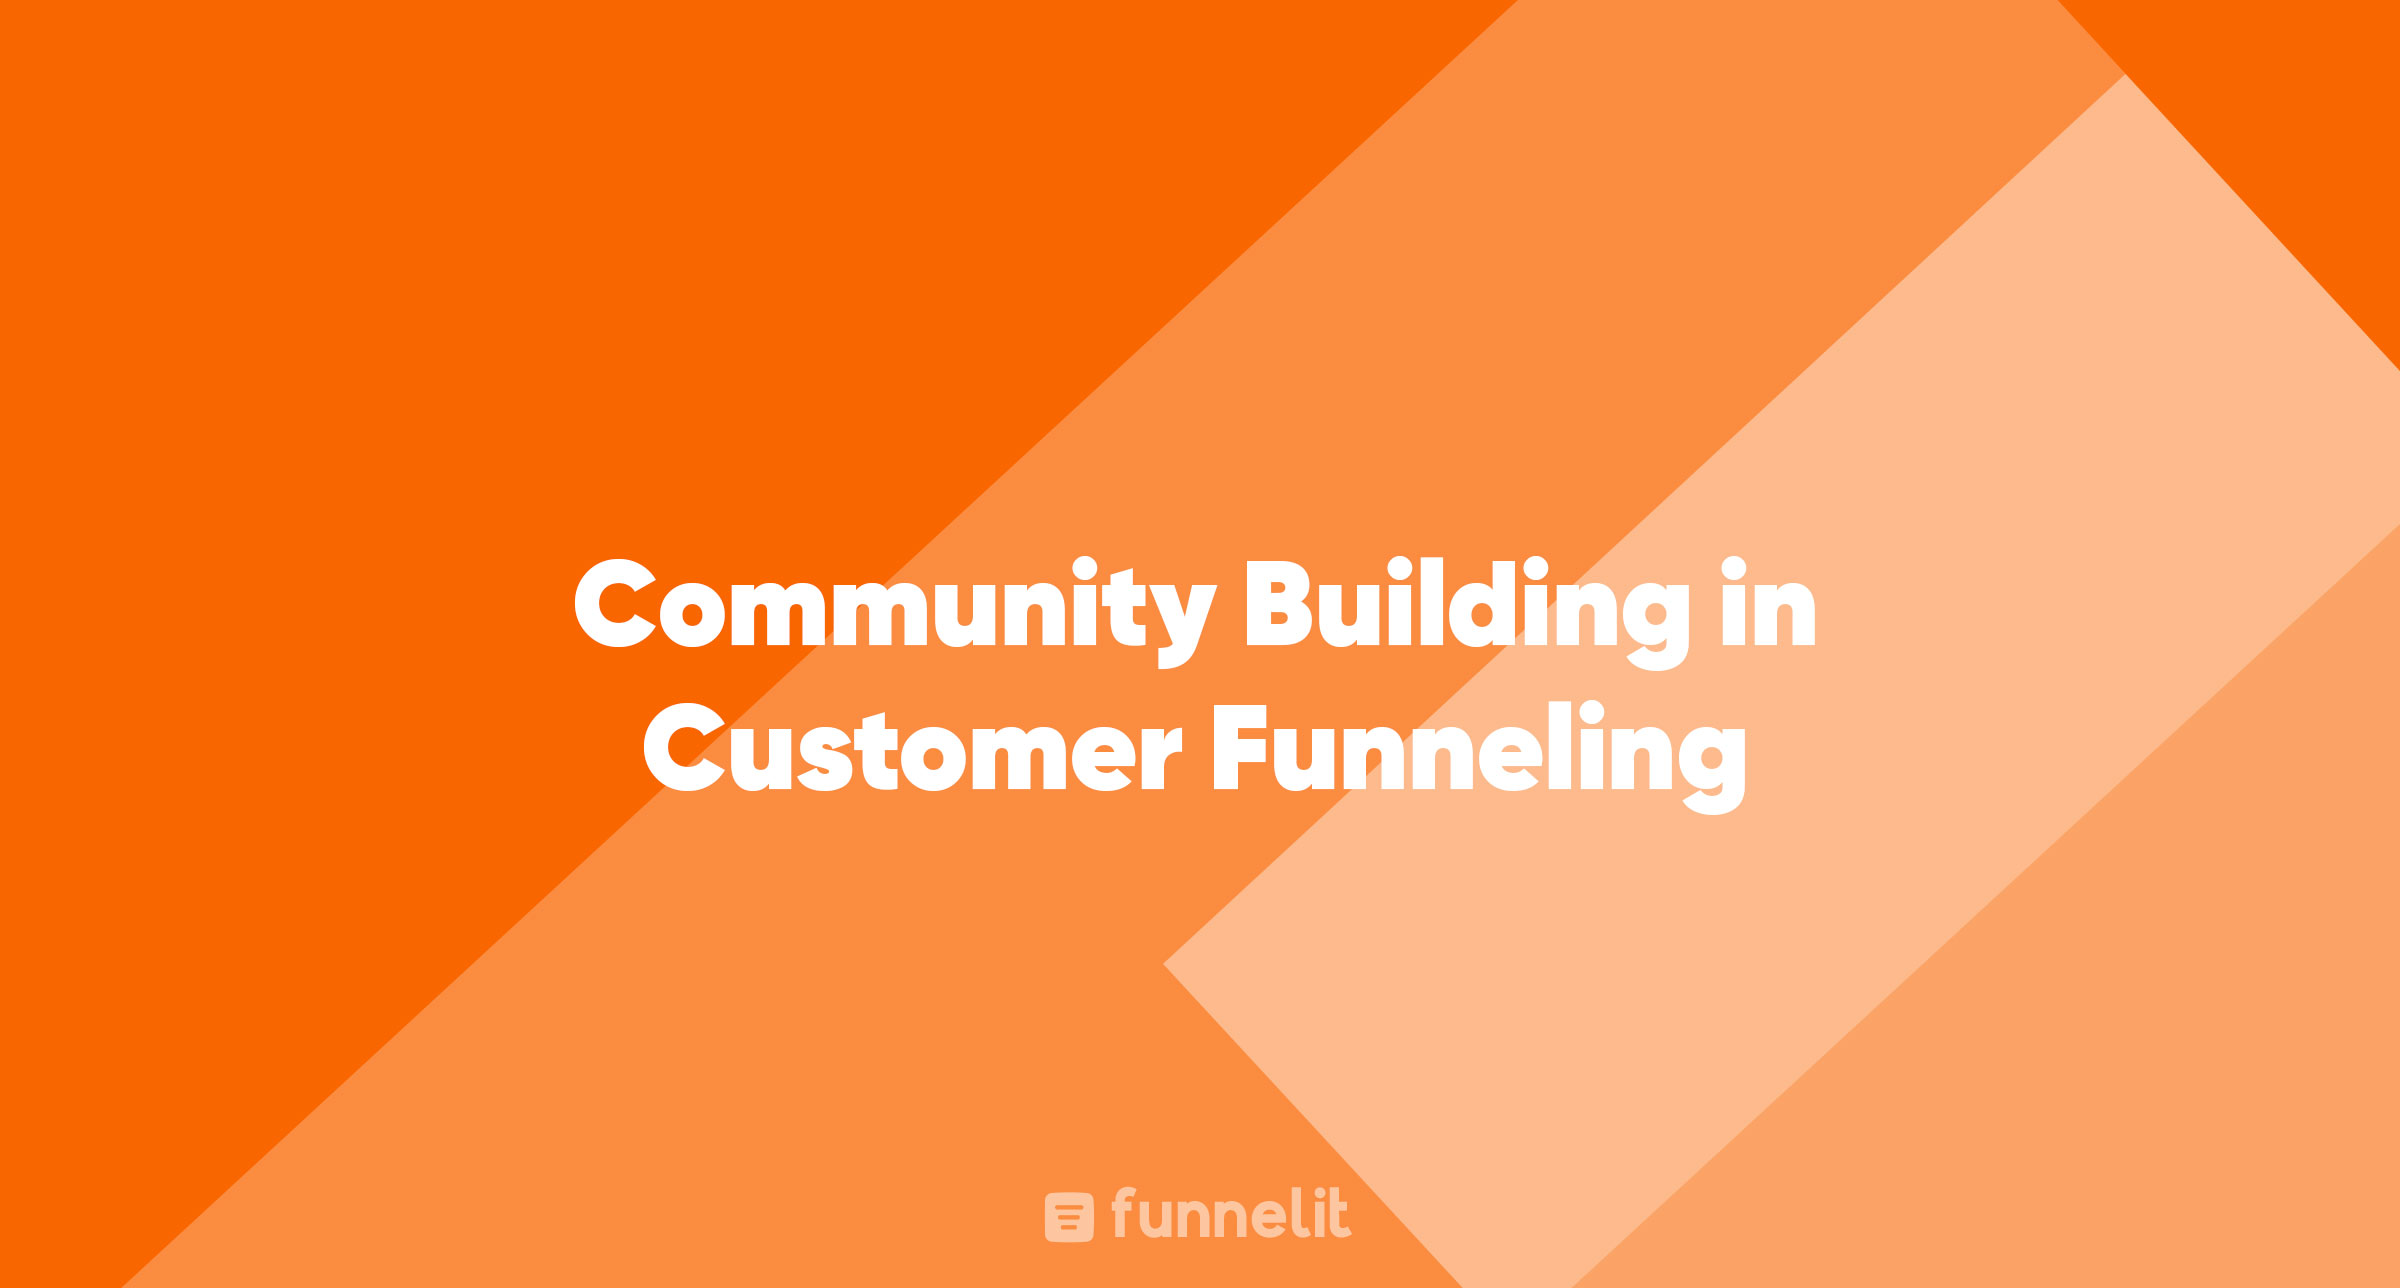 Article | Community Building in Customer Funneling